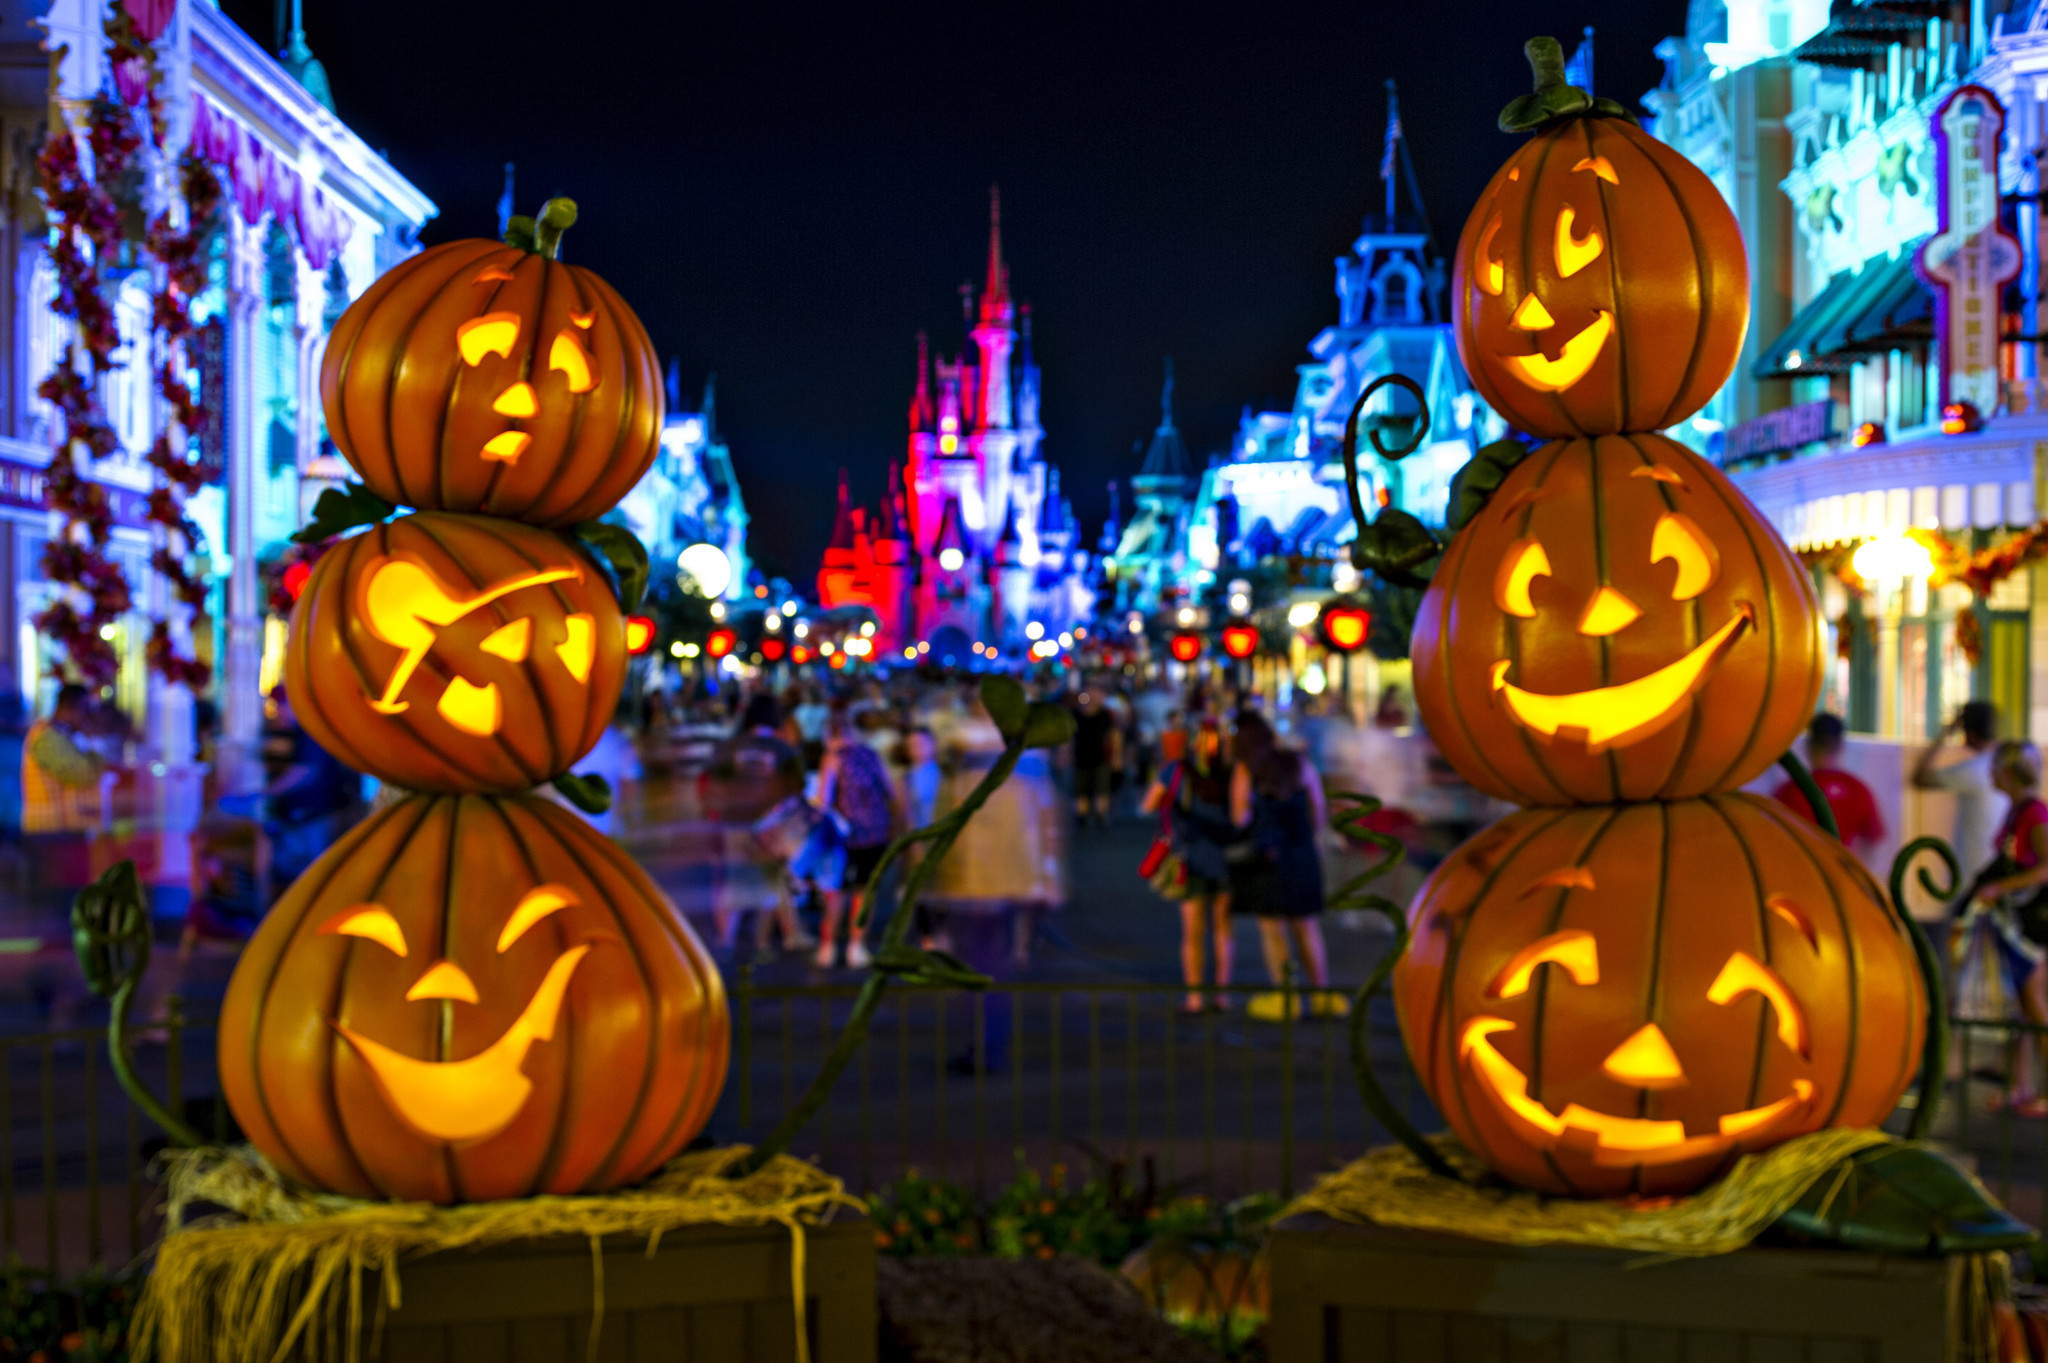 2048x1363 Halloween in August? Disney sets dates for 2017 Not-So-Scary and Christmas  events - Orlando Sentinel